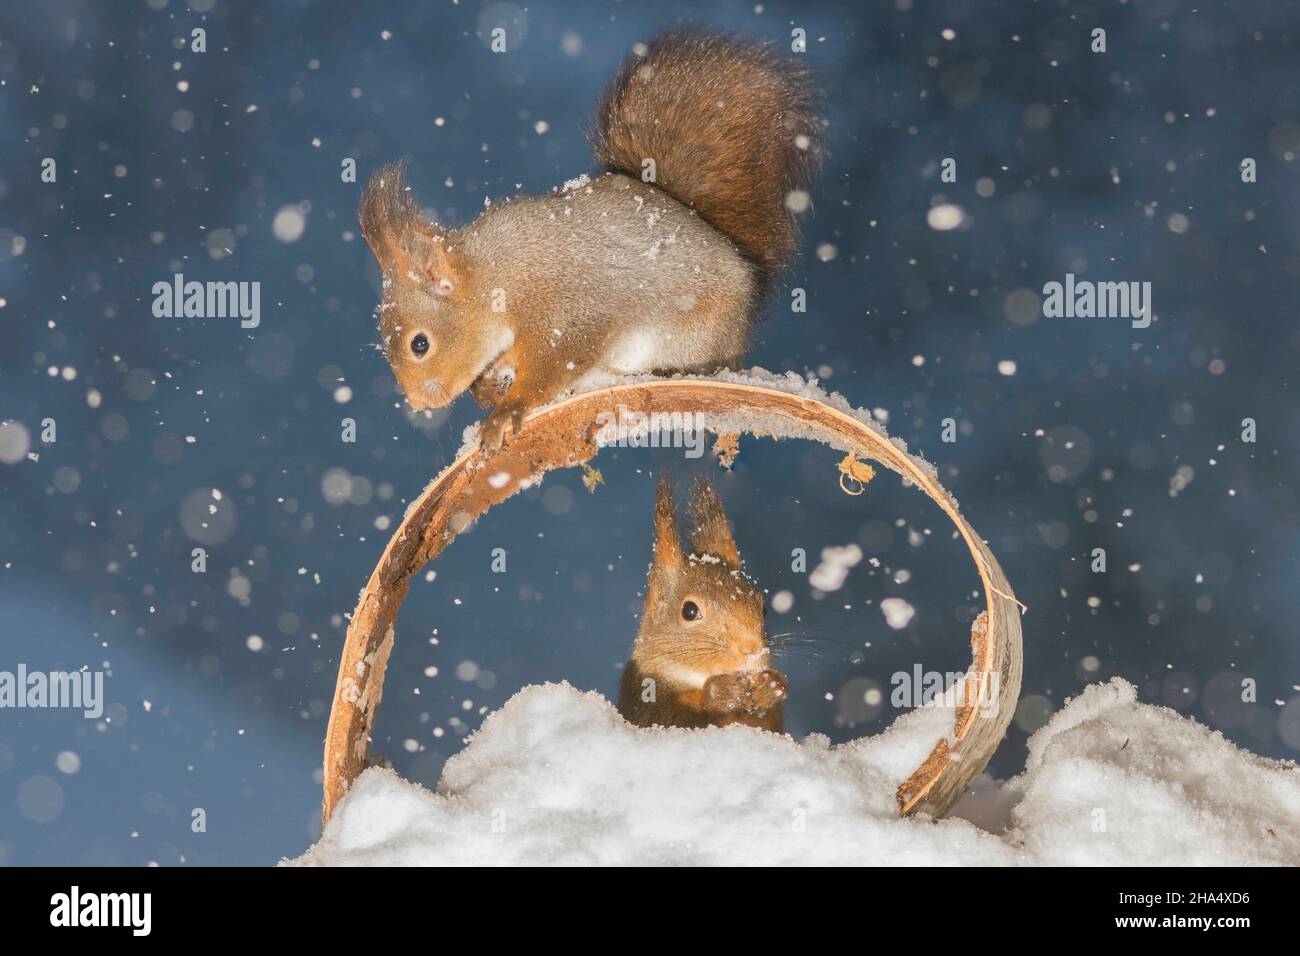 profile and close up of a red squirrel on round wood while it is snowing and another in the circle Stock Photo